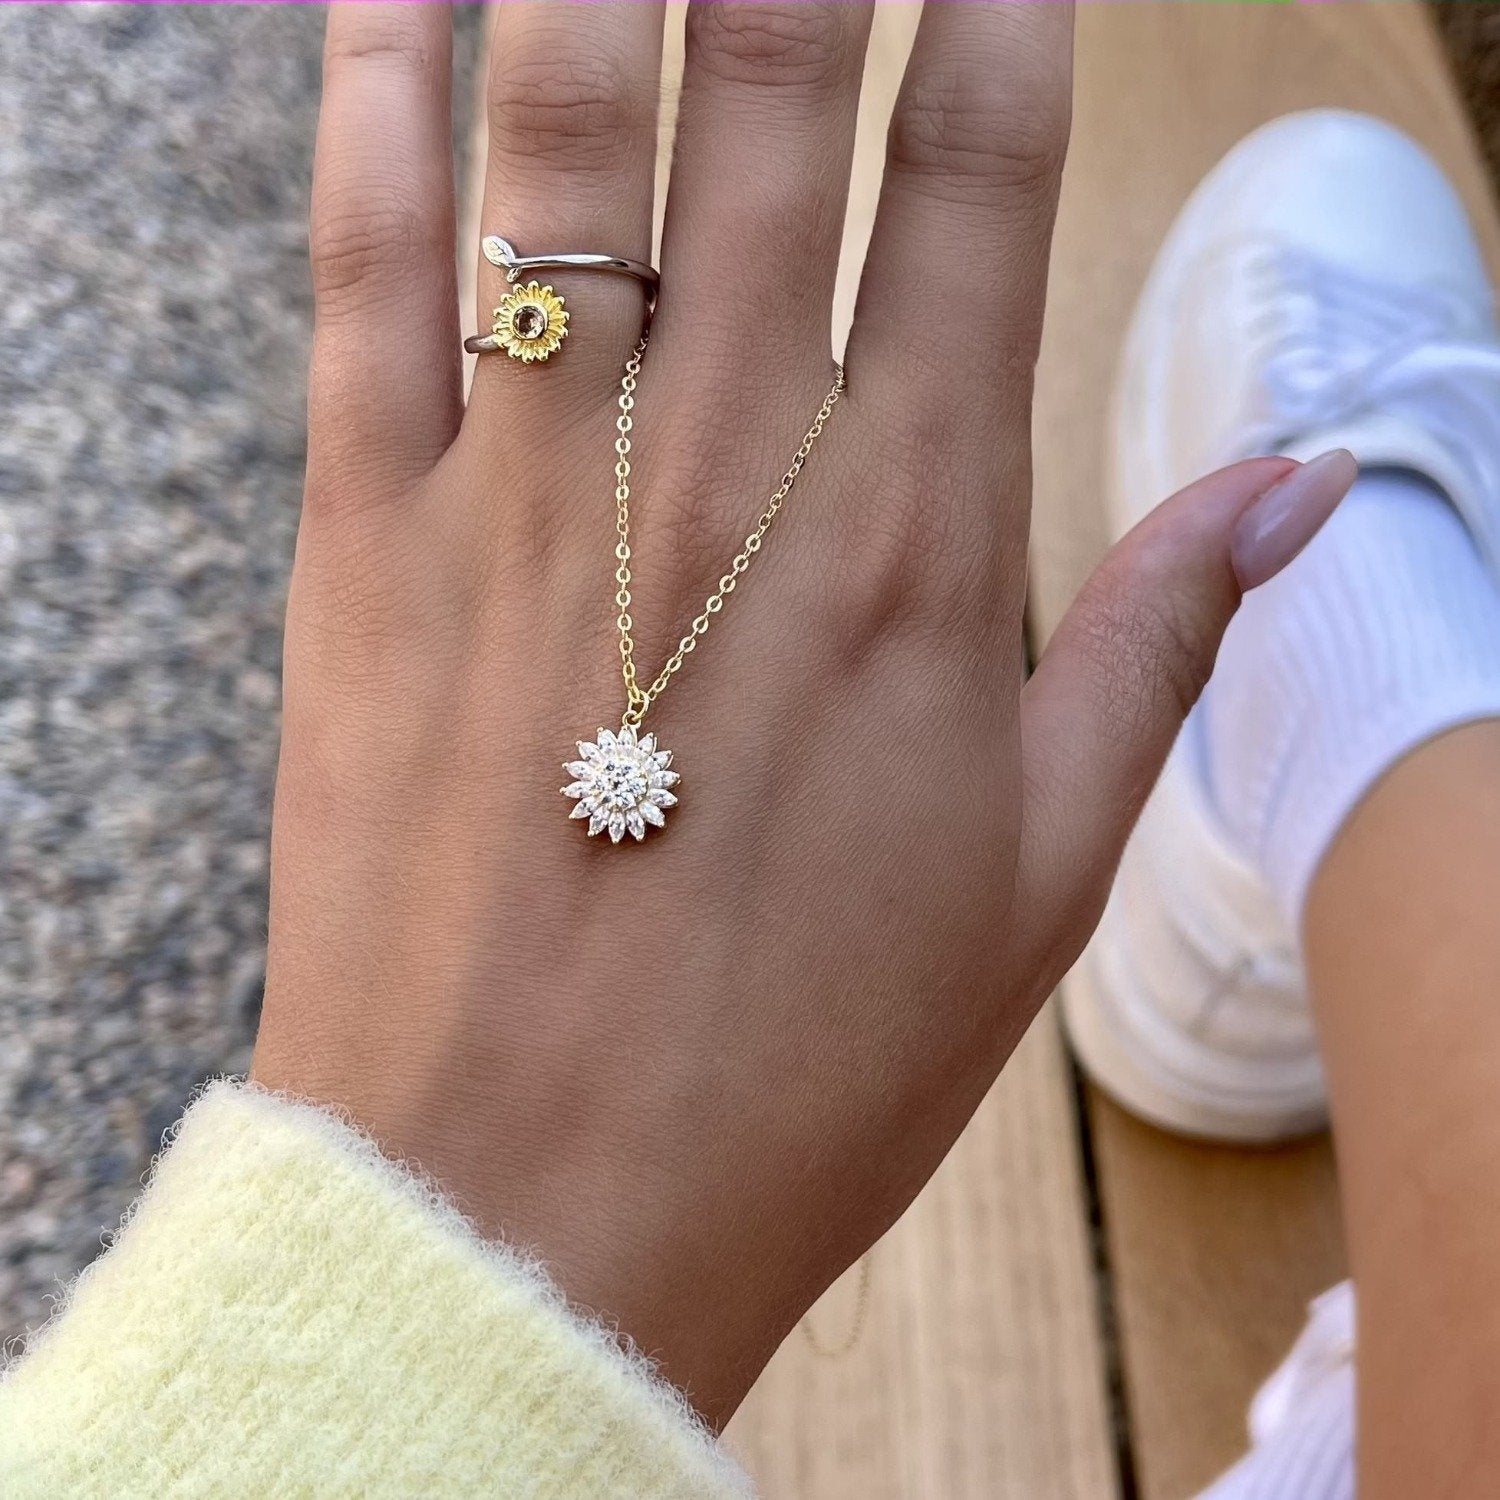 Crystal Sunflower Necklace |925 Sterling Silver